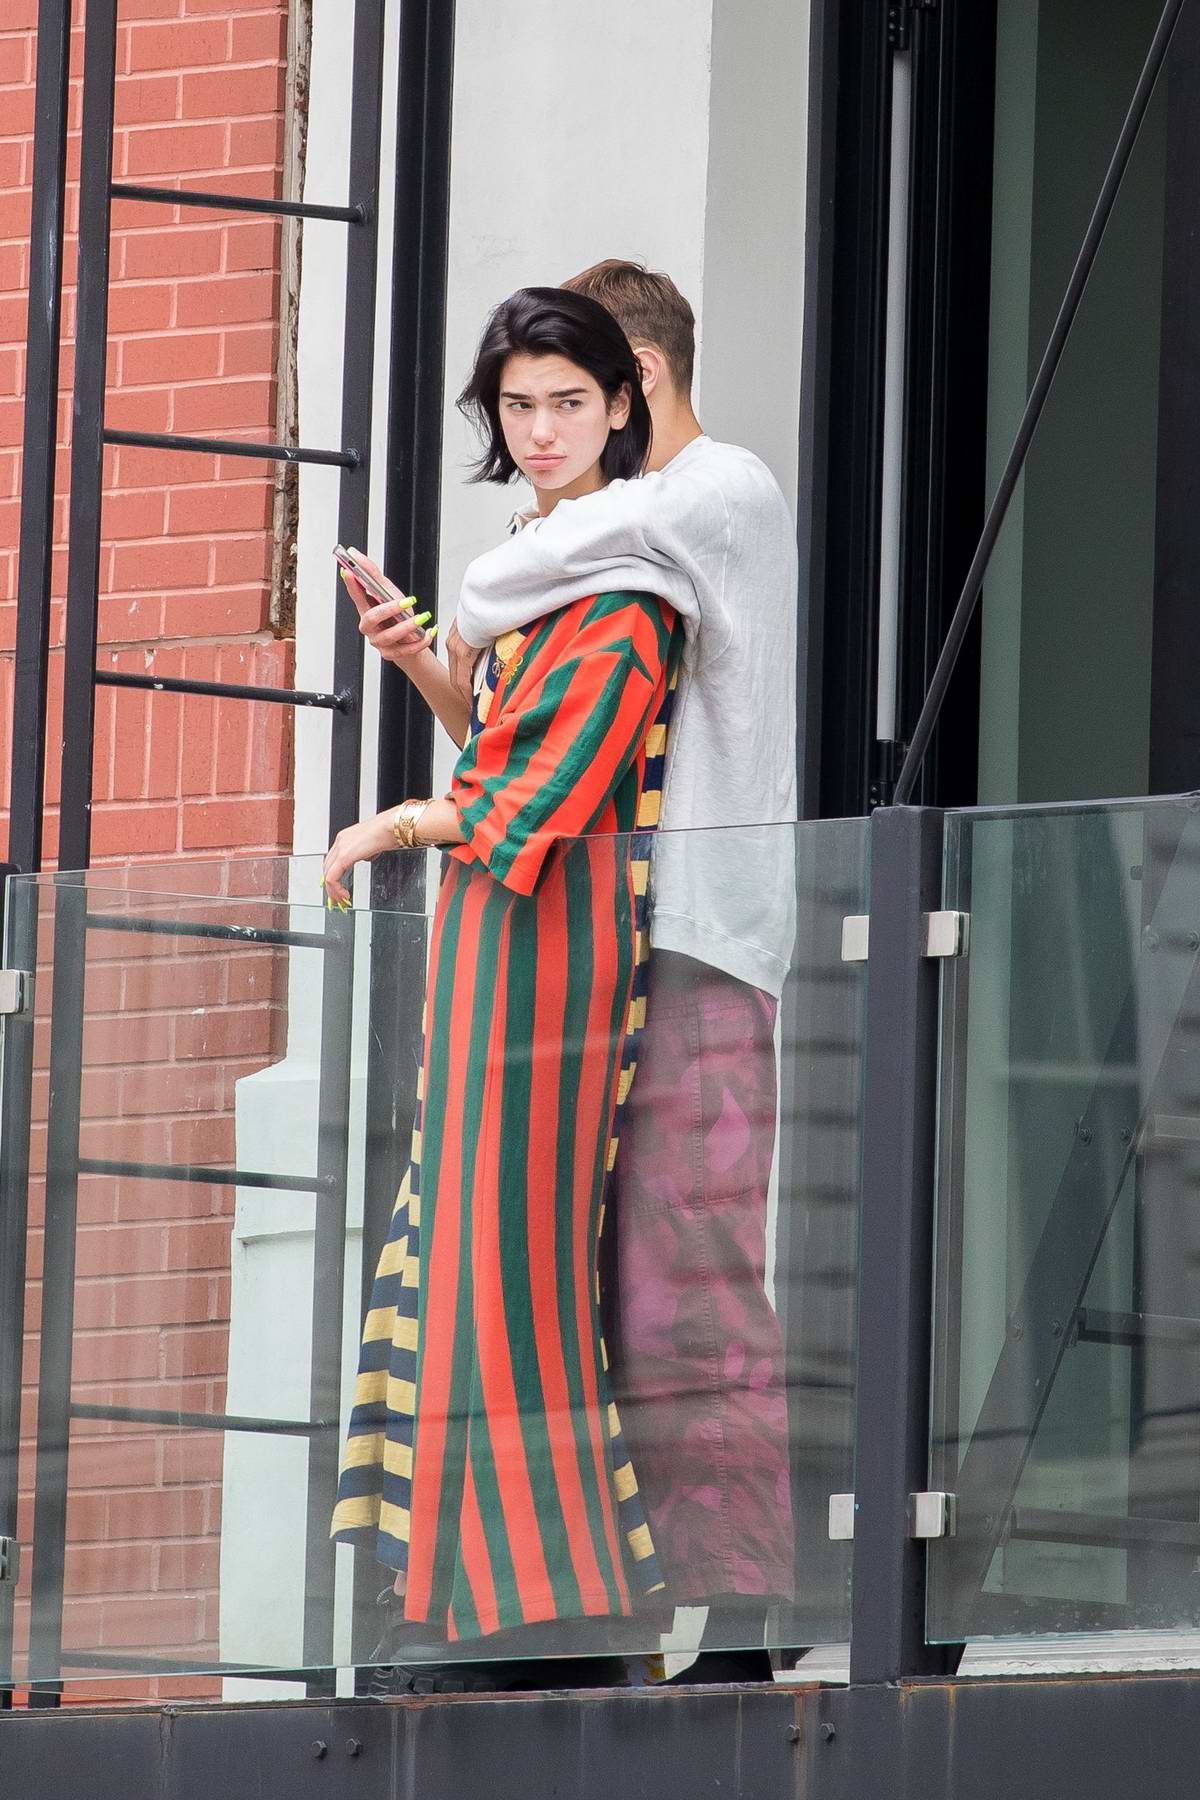 dua-lipa-and-anwar-hadid-hang-out-on-the-balcony-of-an-apartment-complex-in-new-york-city-100719_7.jpg